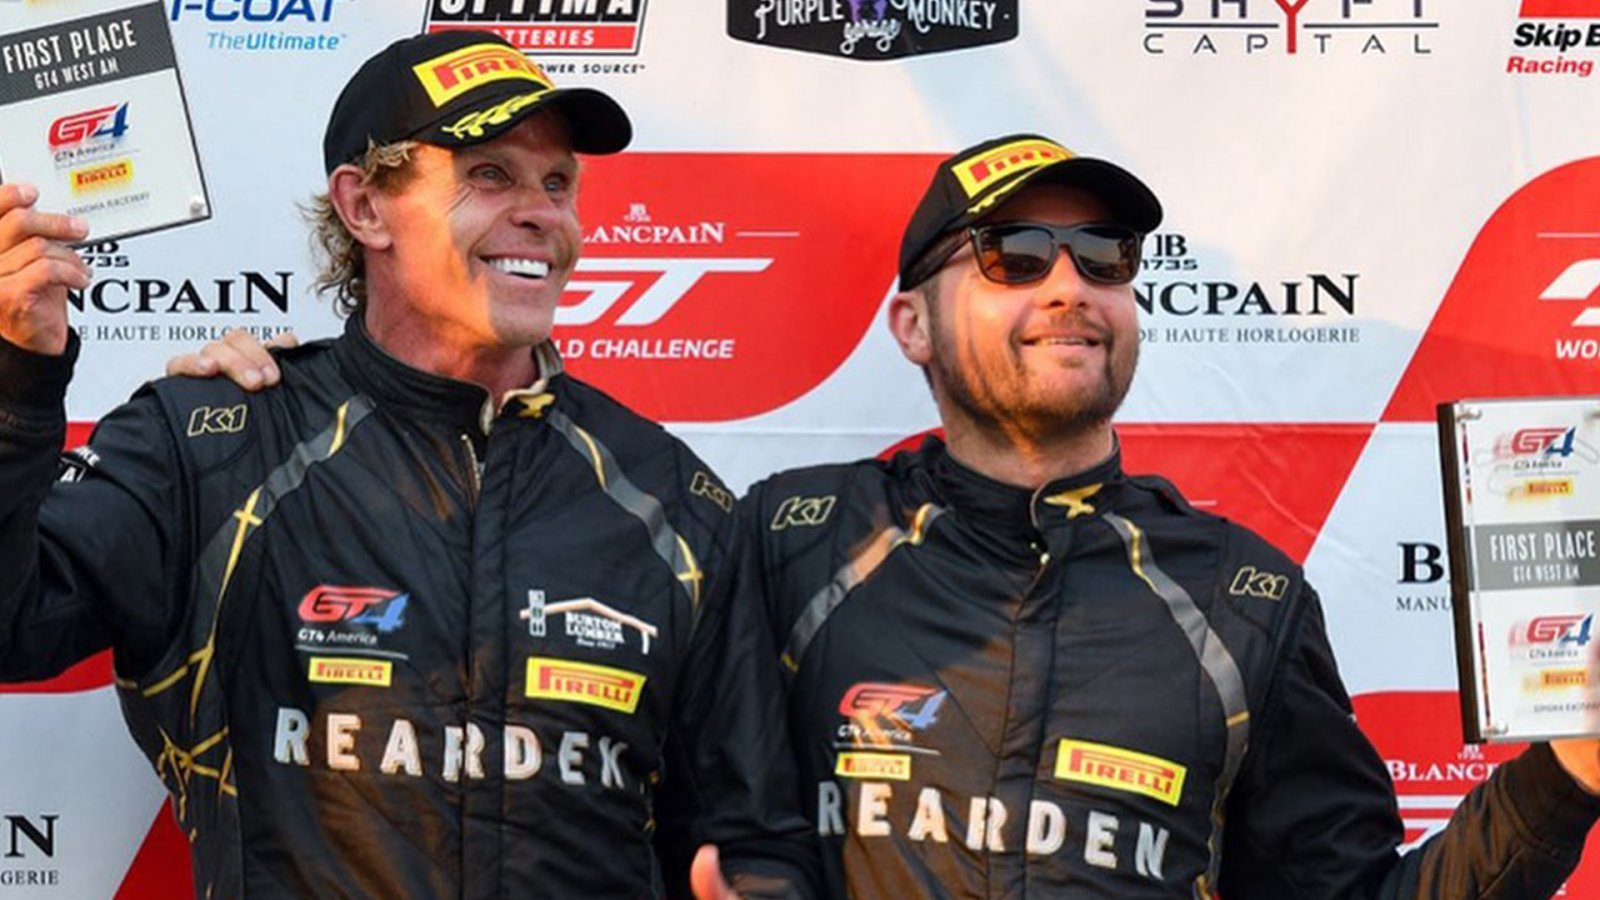 Burton/Kozarov Duo Returns to Watkins Glen Int’l This Weekend Seeking More Victories at the Famed Road Circuit with Rearden Racing